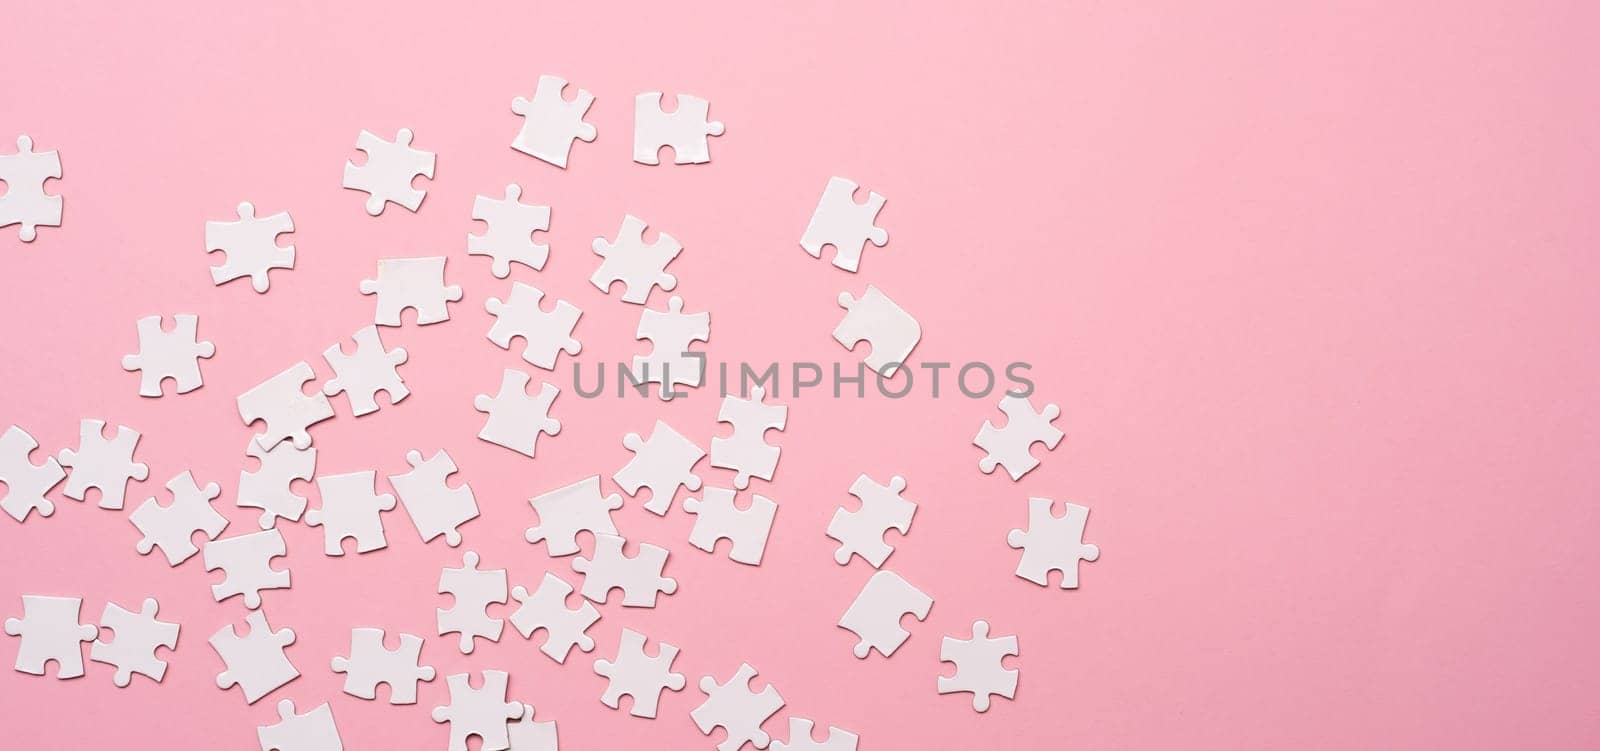 Scattering of puzzle pieces on pink background by GekaSkr